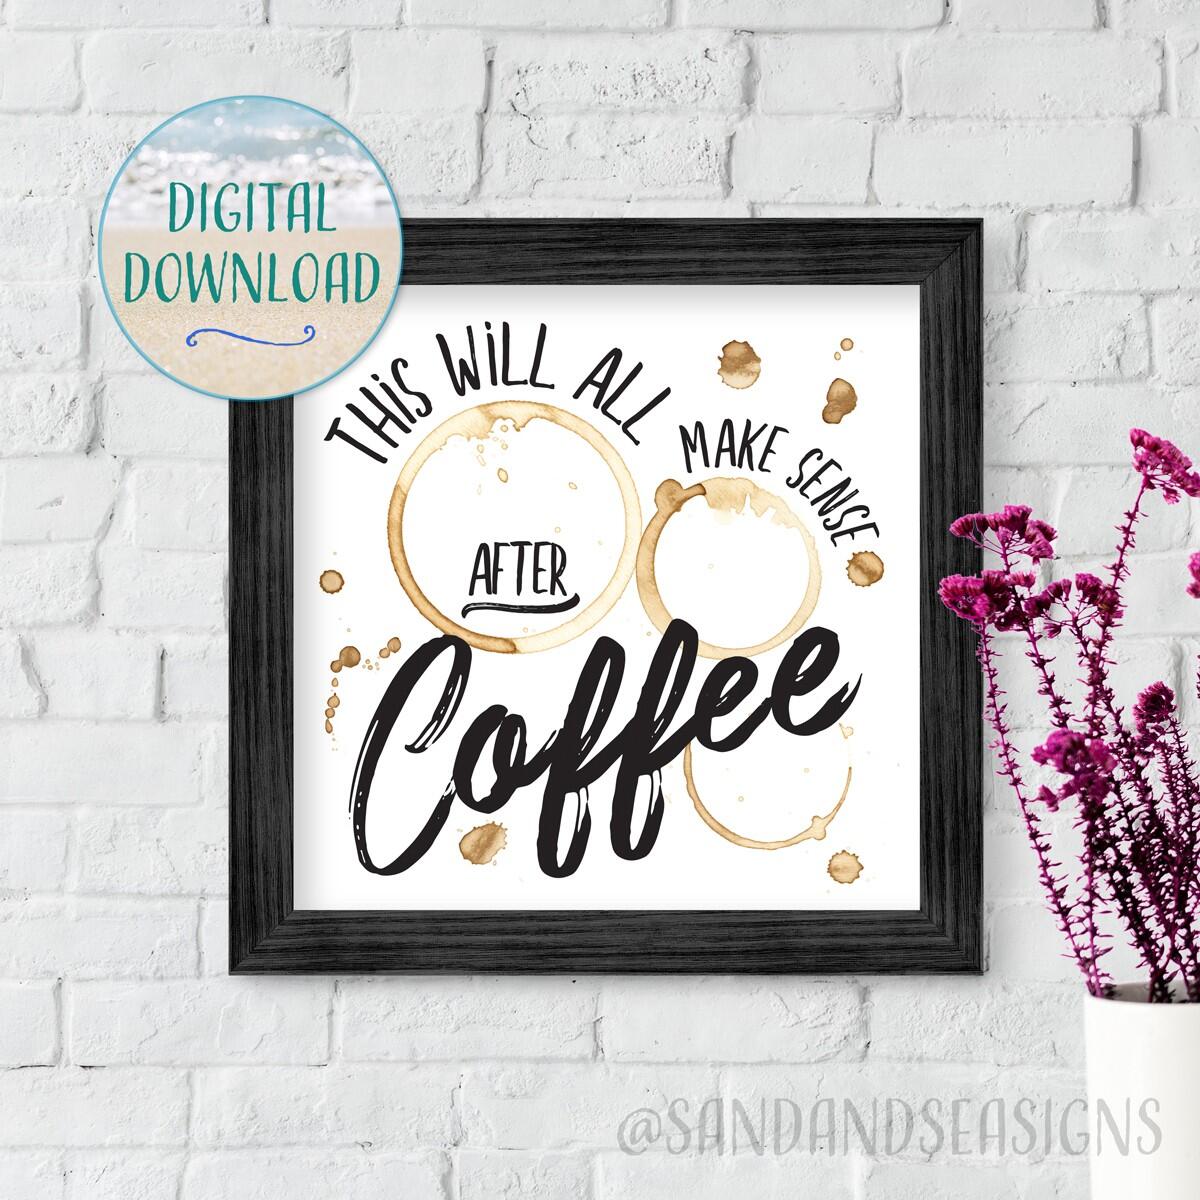 This Will All Make Sense After Coffee, Digital Download Sign